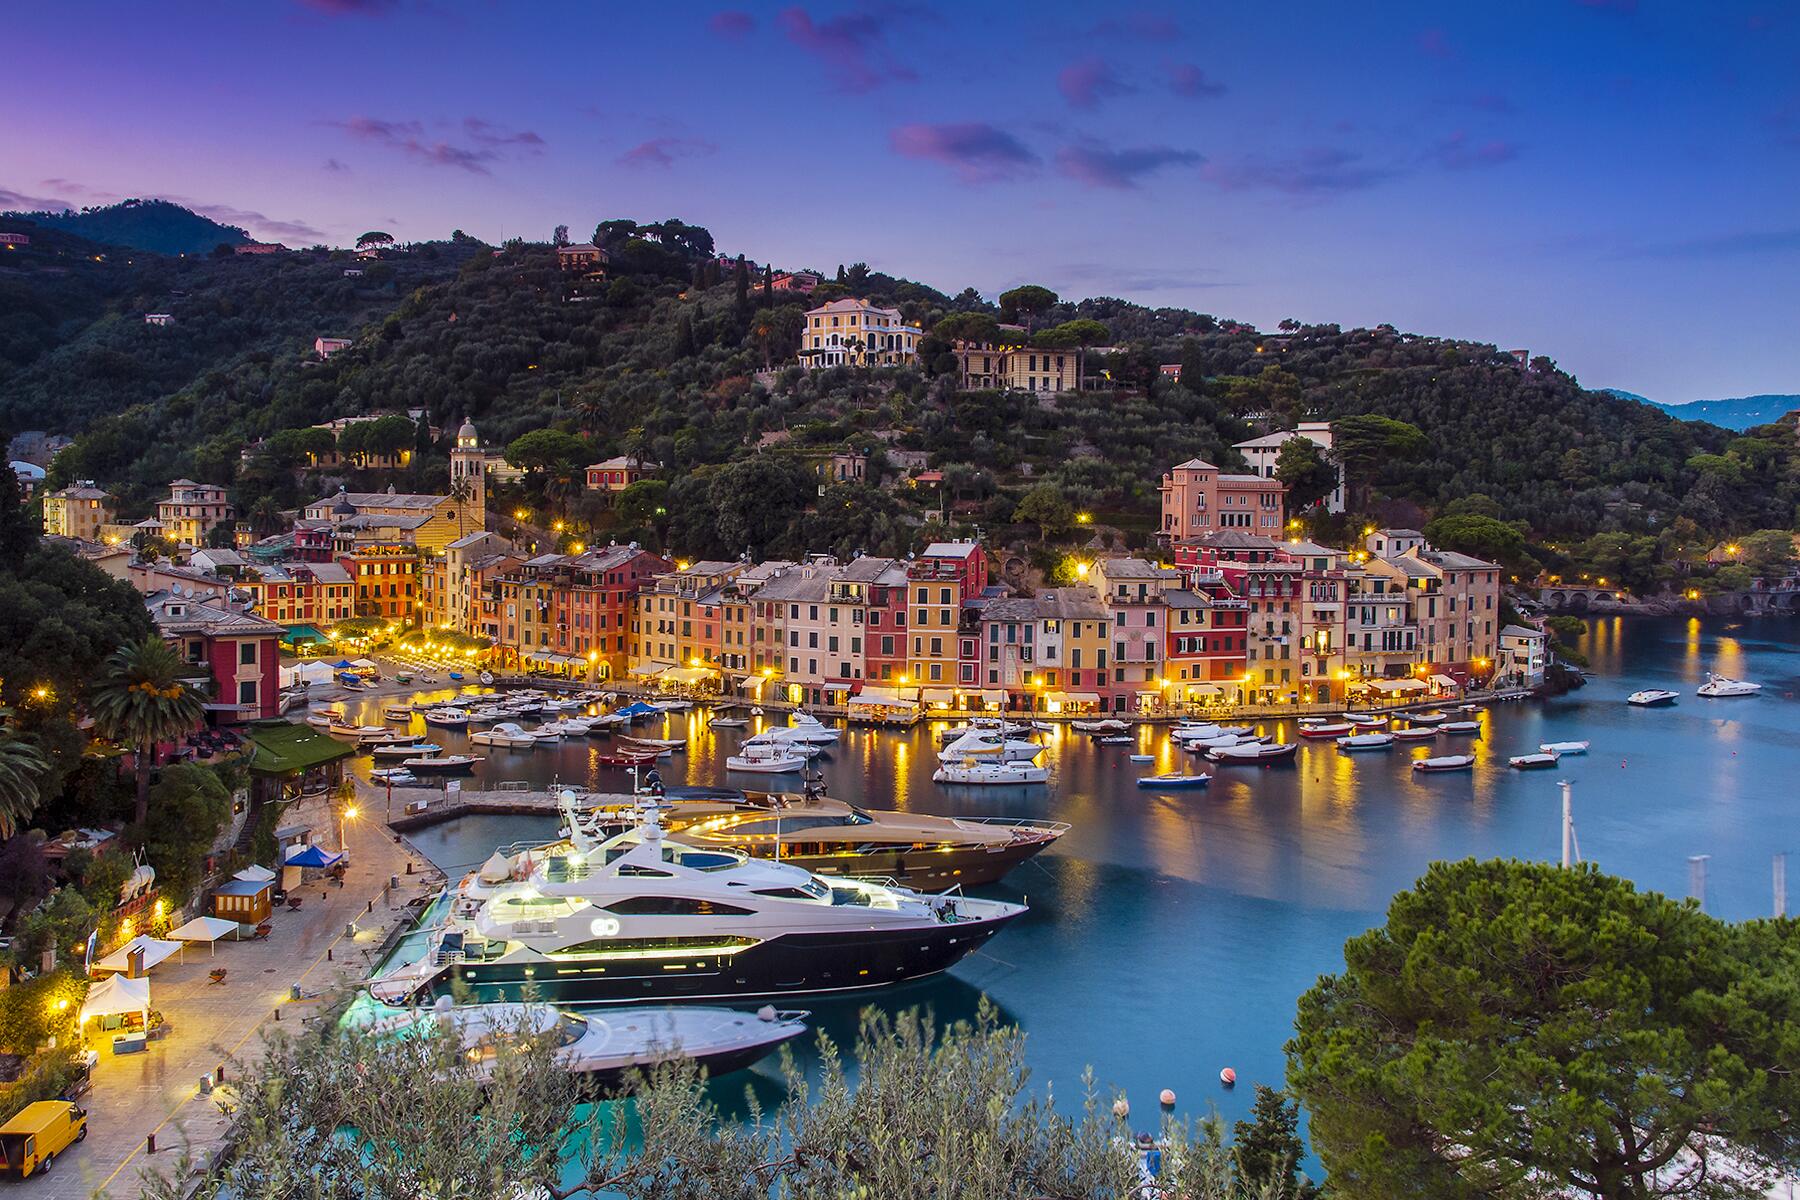 How to See Portofino, Italy on a Budget